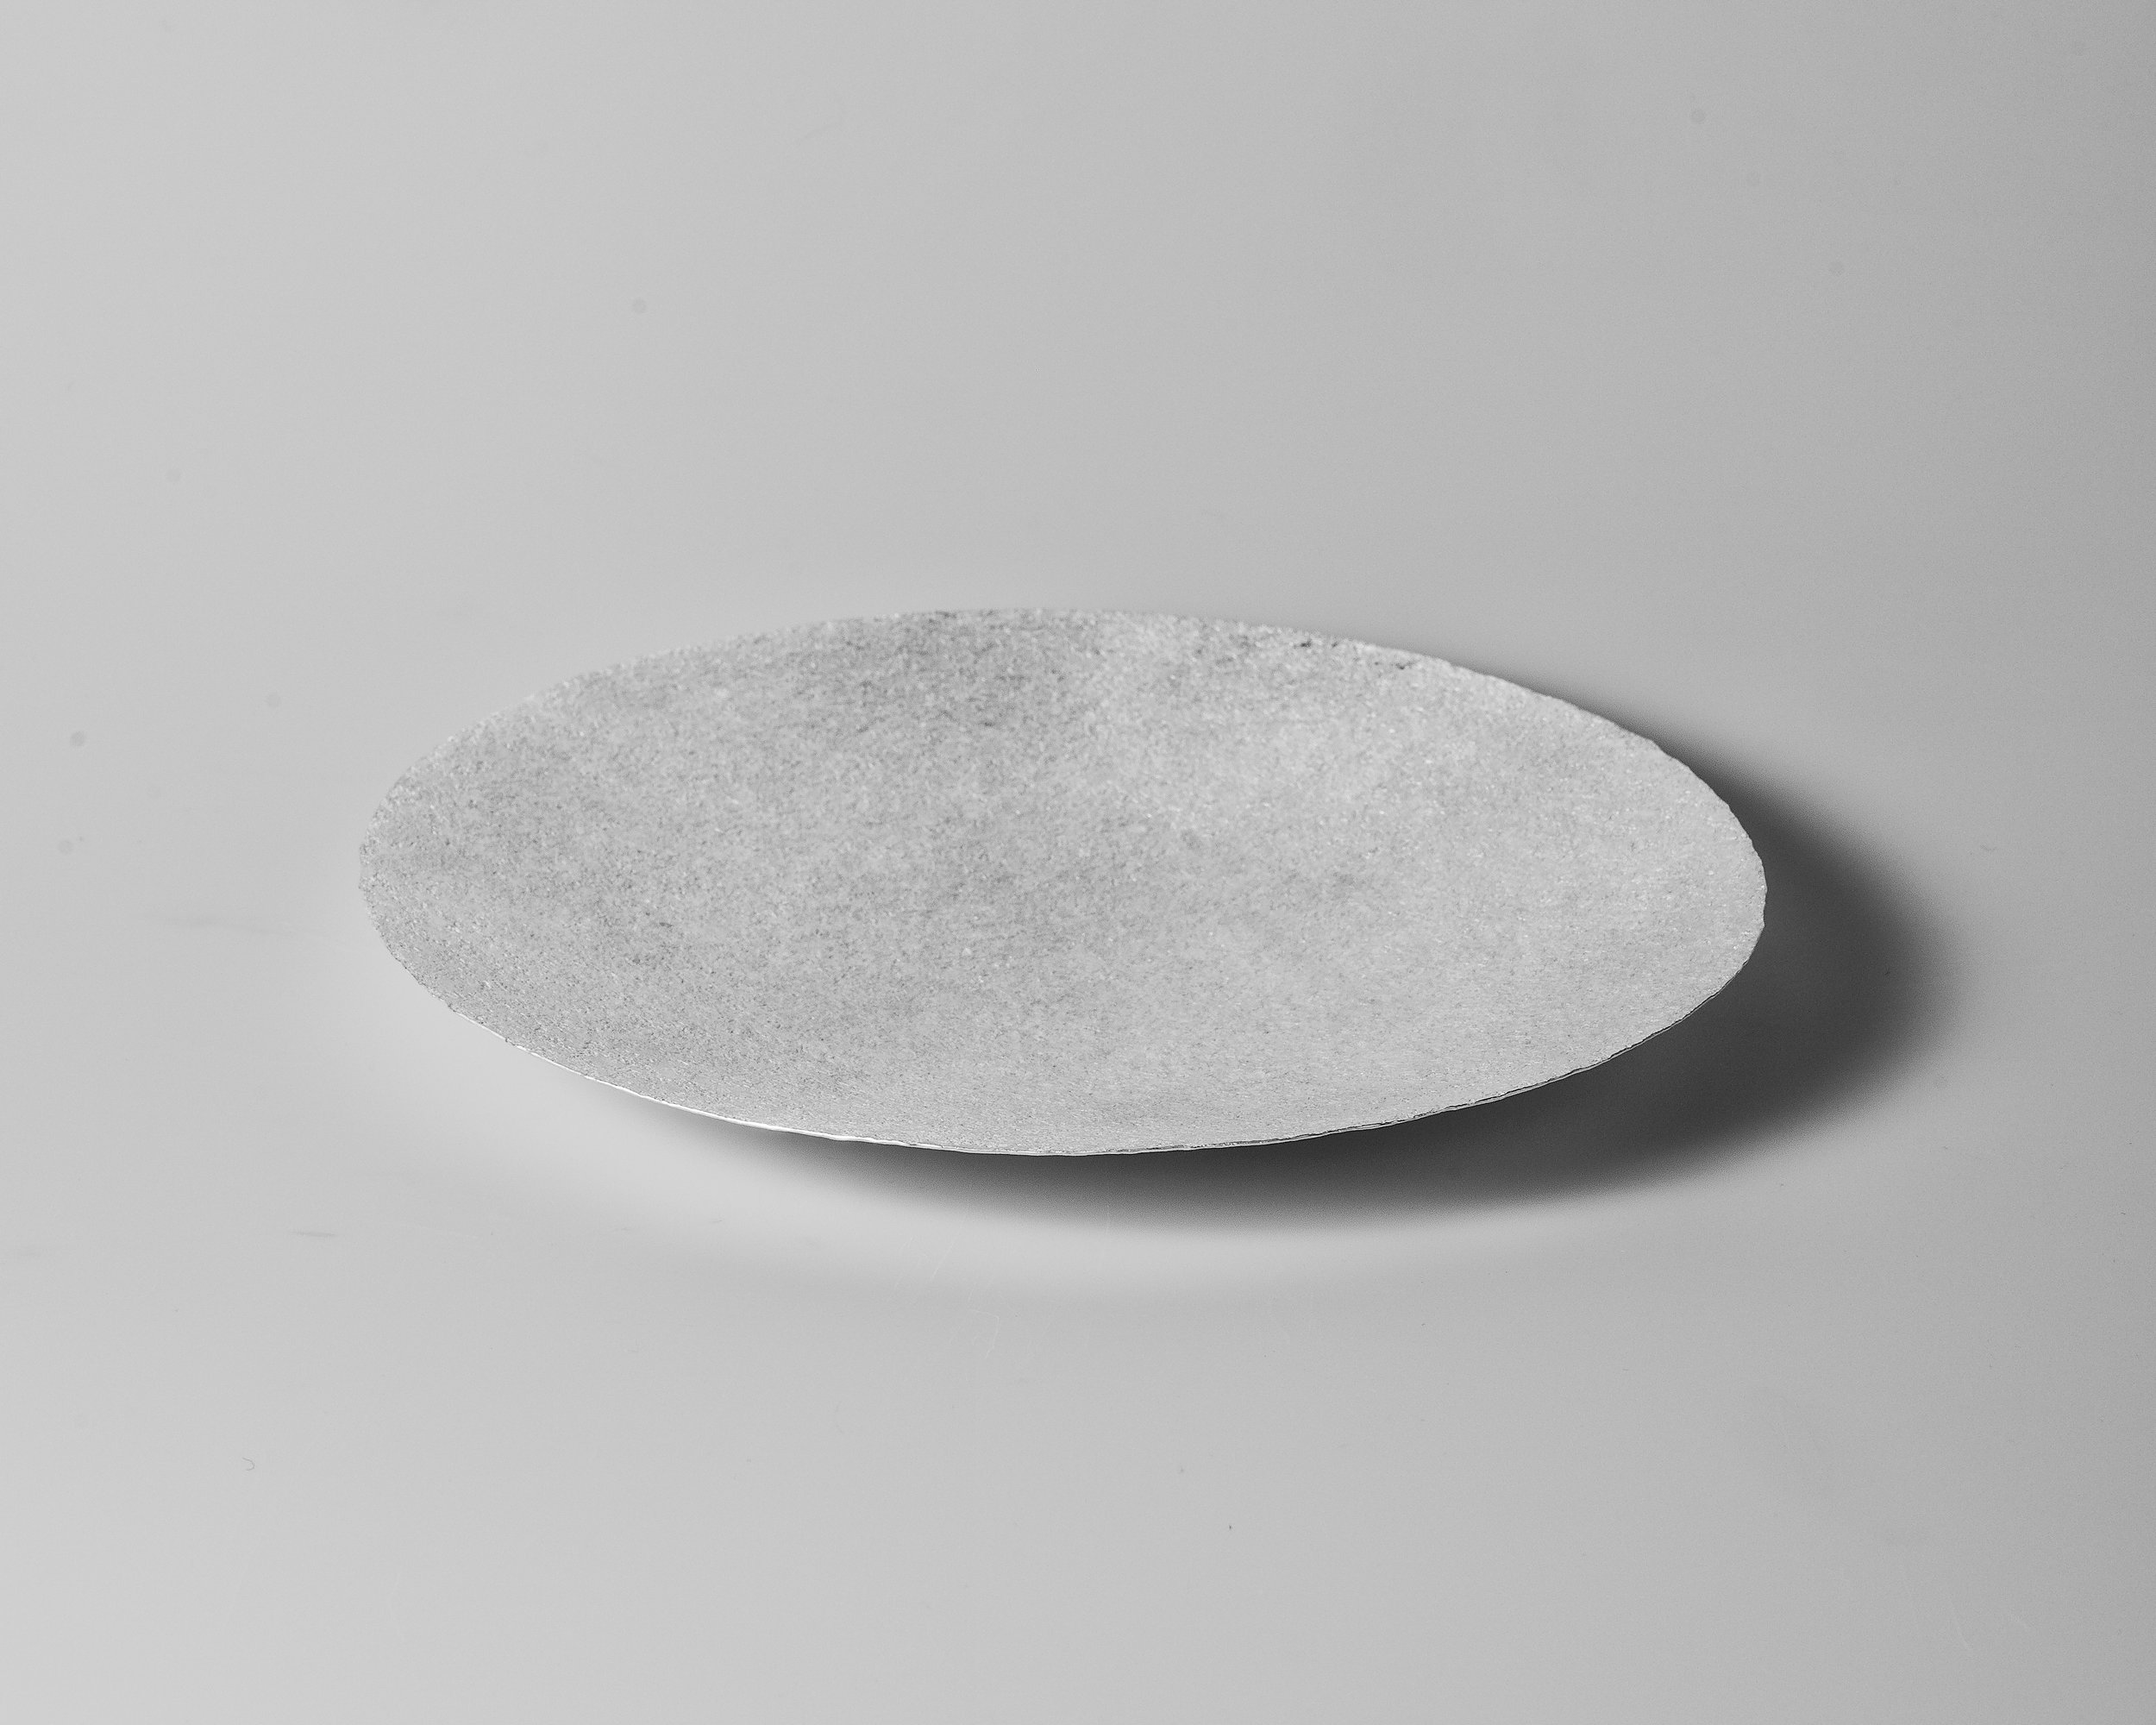   The importance of water IV (Dish), 2018  | Forged silver. 925 S. 576 g. H. 3 x W. 29 cm.  Photo credit: Christian Tviberg 